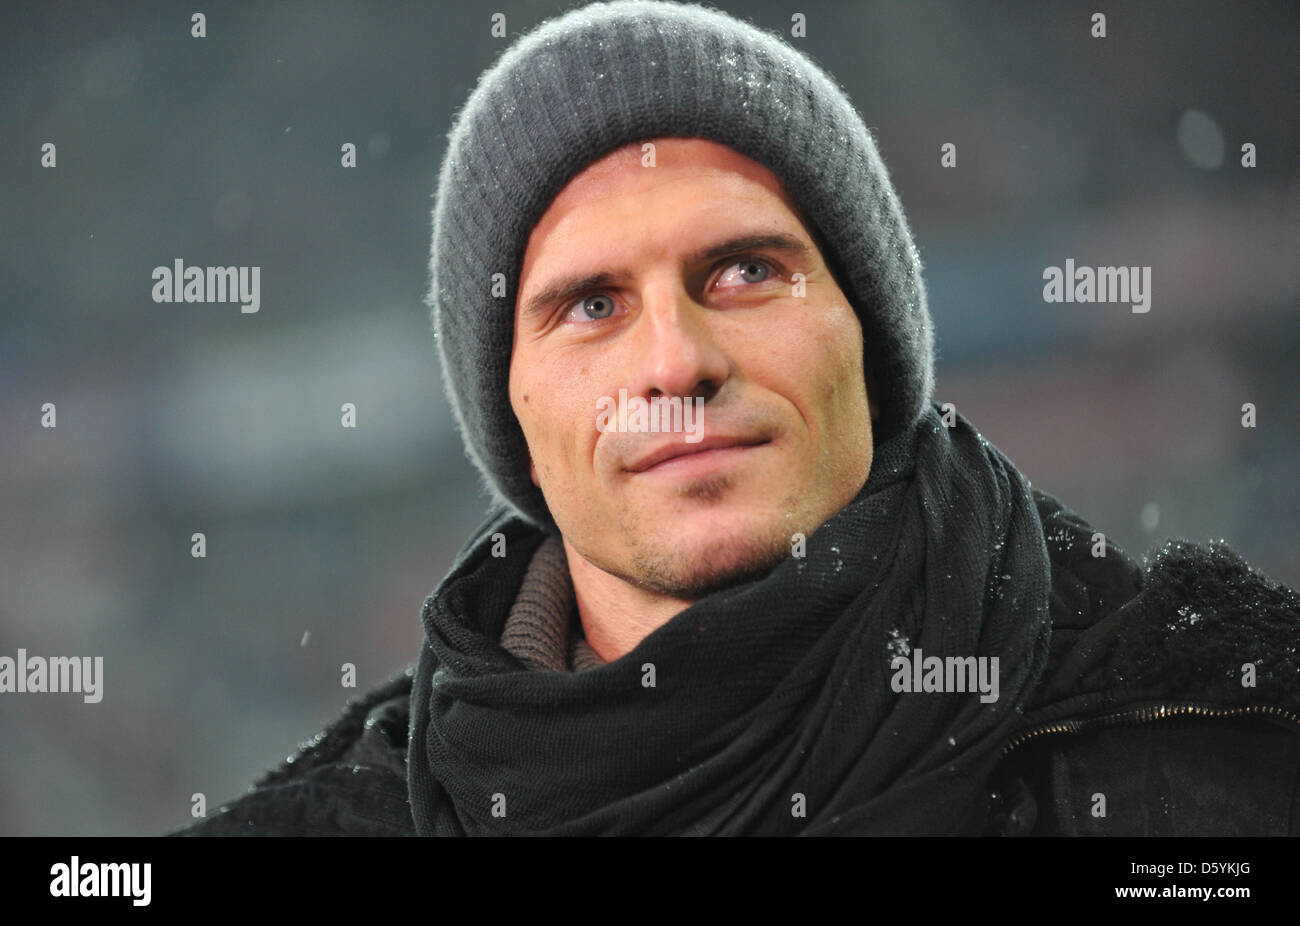 Bayern's Mario Gomez smiles prior to the German Bundesliga soccer match FC Bayern Munich vs Bayer 04 Leverkusen at Allianz Arena in Munich, Germany, 28 October 2012. The match ended 1:2. Photo: Andreas Gebert Stock Photo